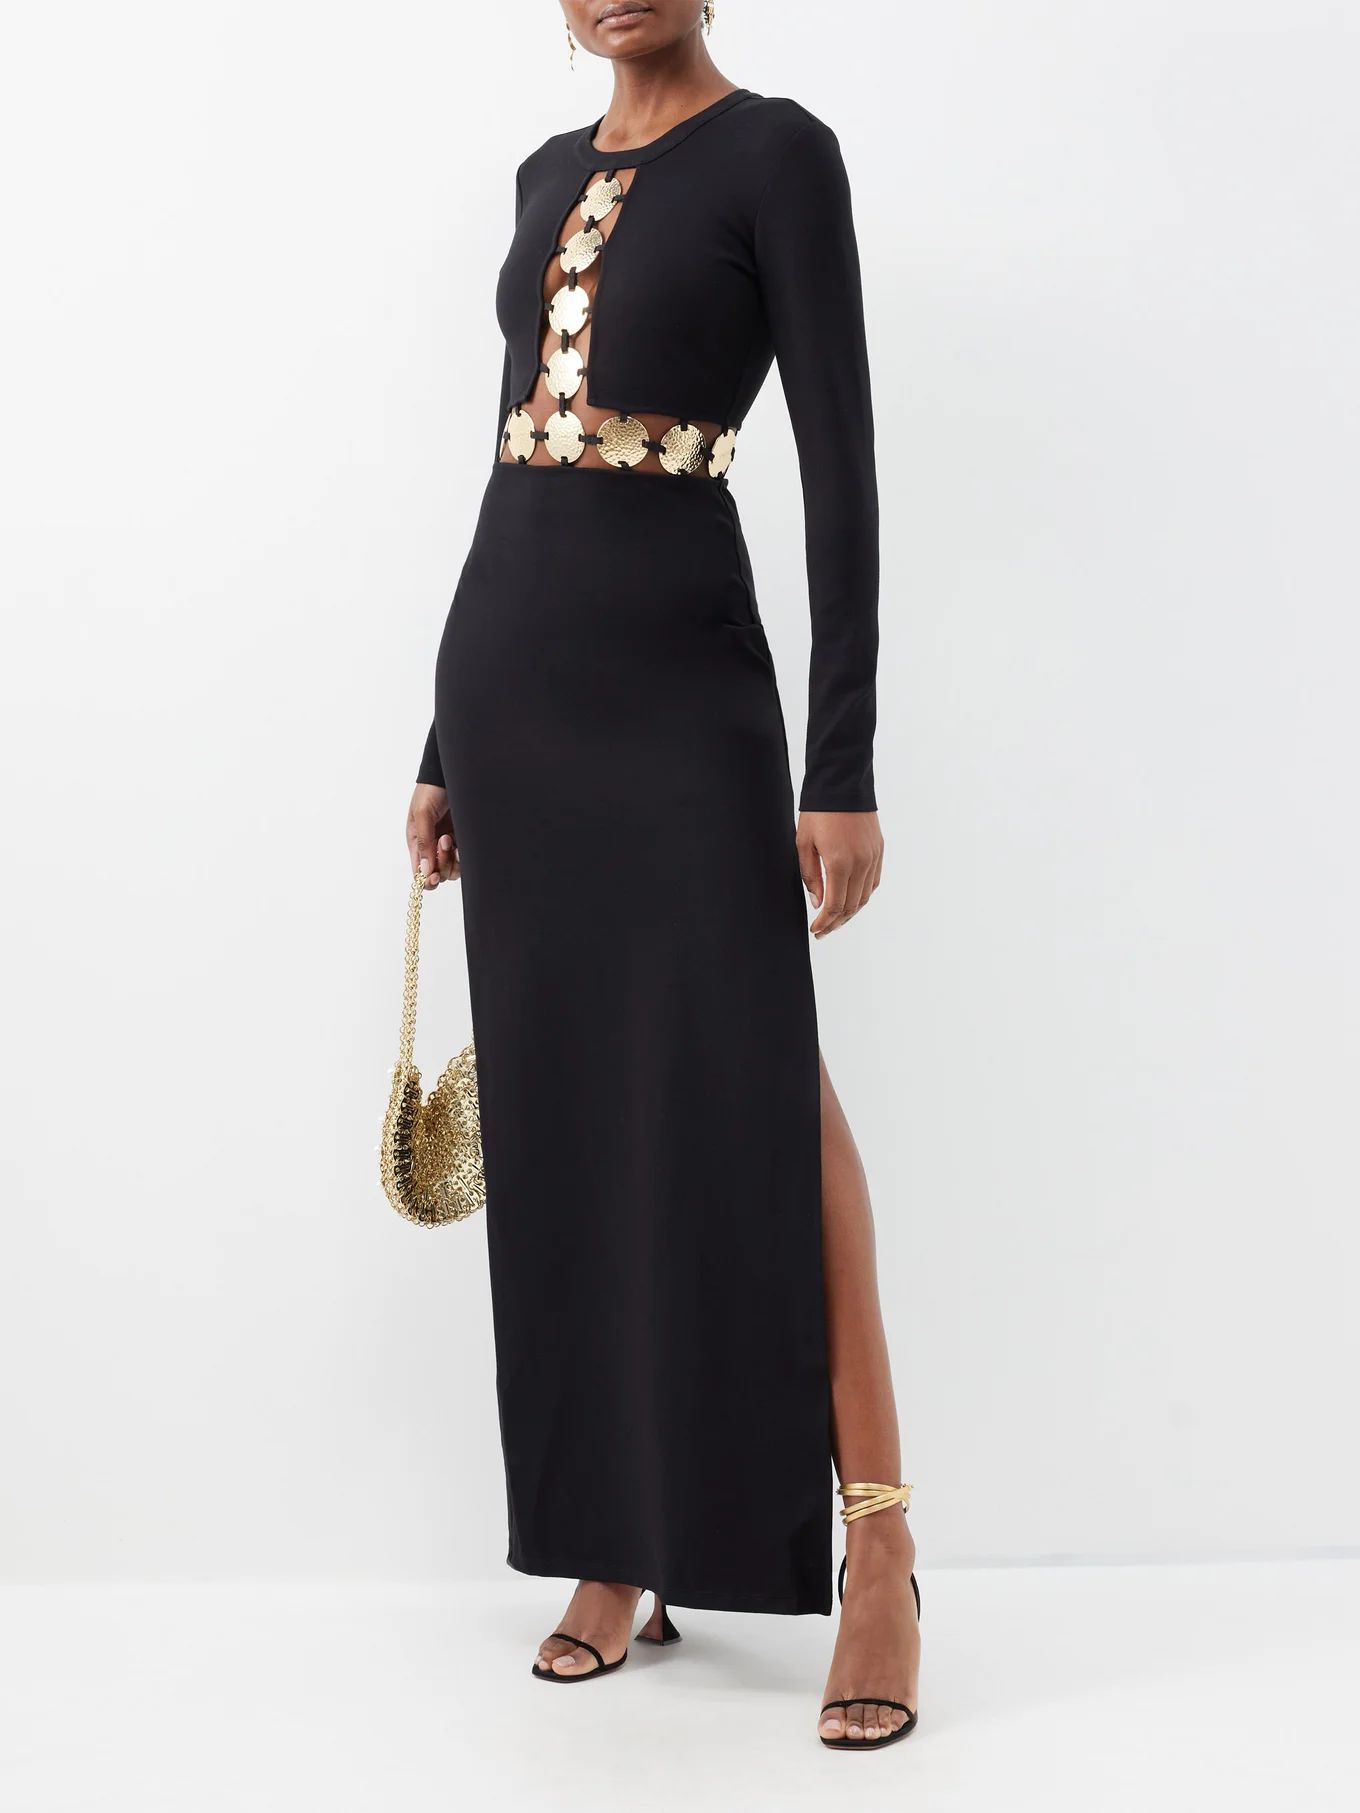 Delphine coin-embellished jersey dress | Staud | Matches (US)